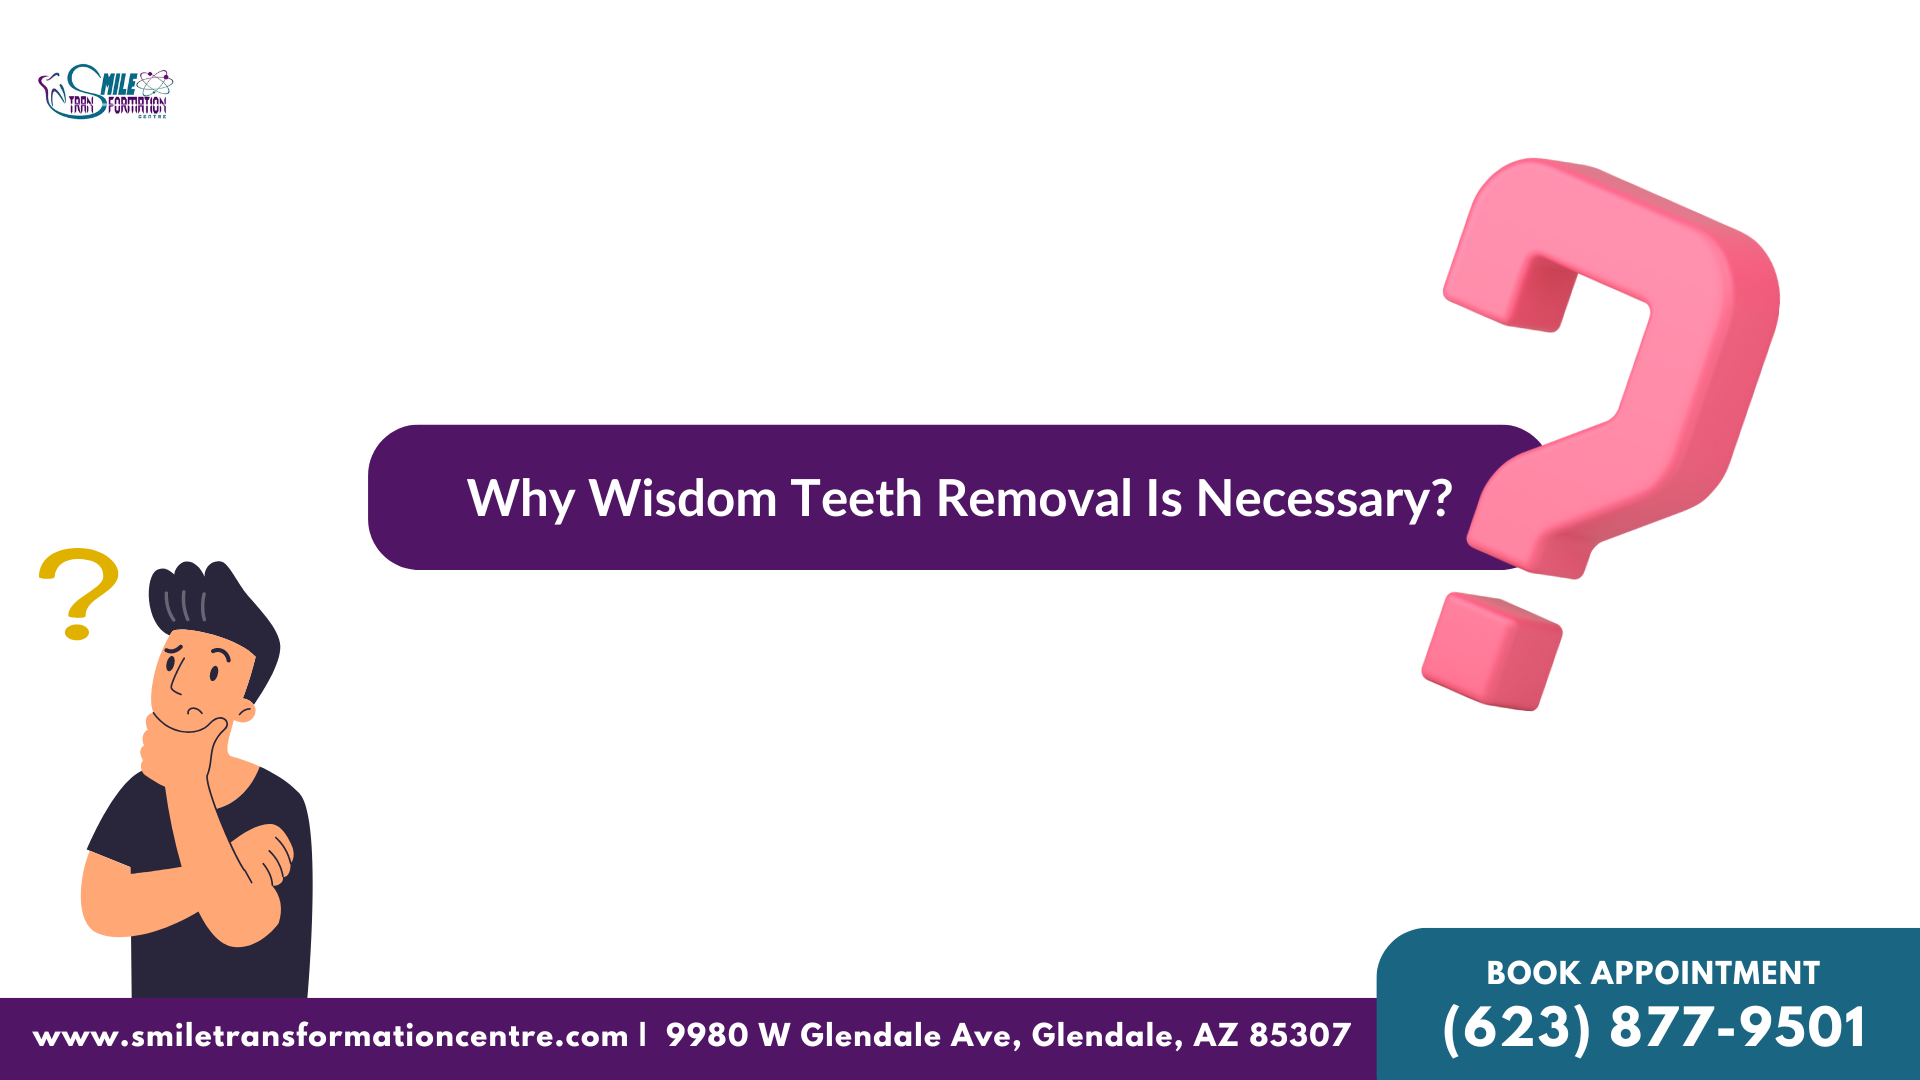 Why Wisdom Teeth Removal Is Necessary